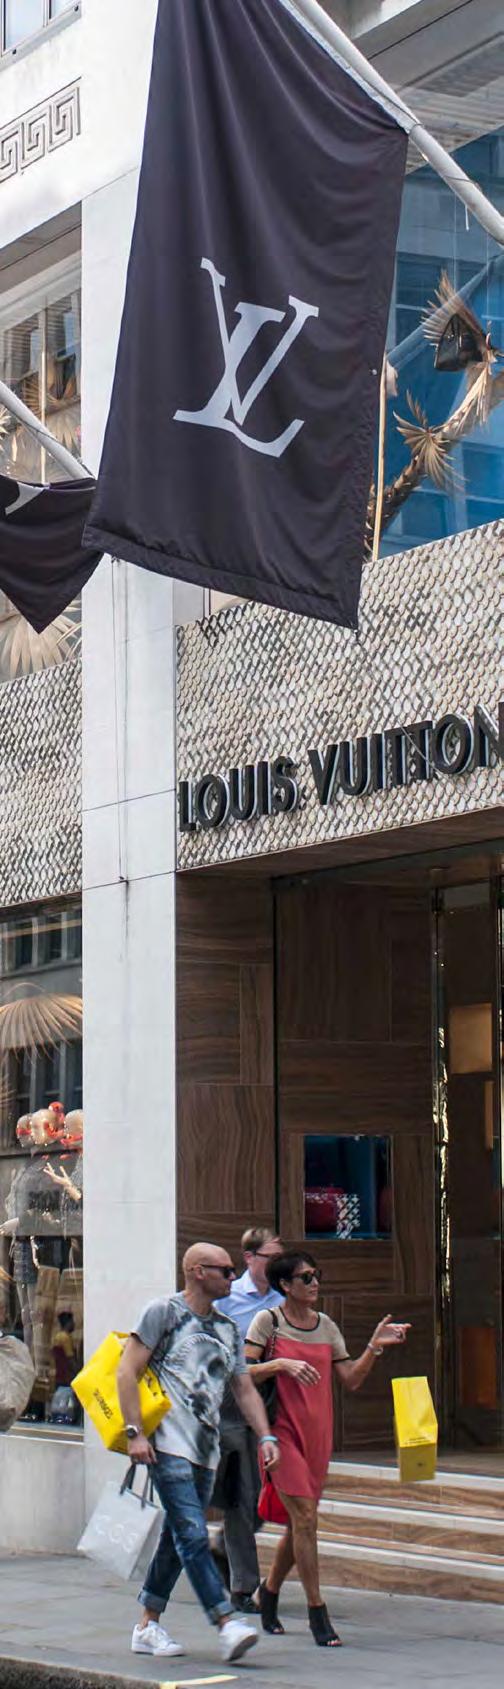 French brand Louis Vuitton is clearly number one in the rankings, the retailer with the highest presence in our city sample, with 86% coverage in the 140 cities monitored.